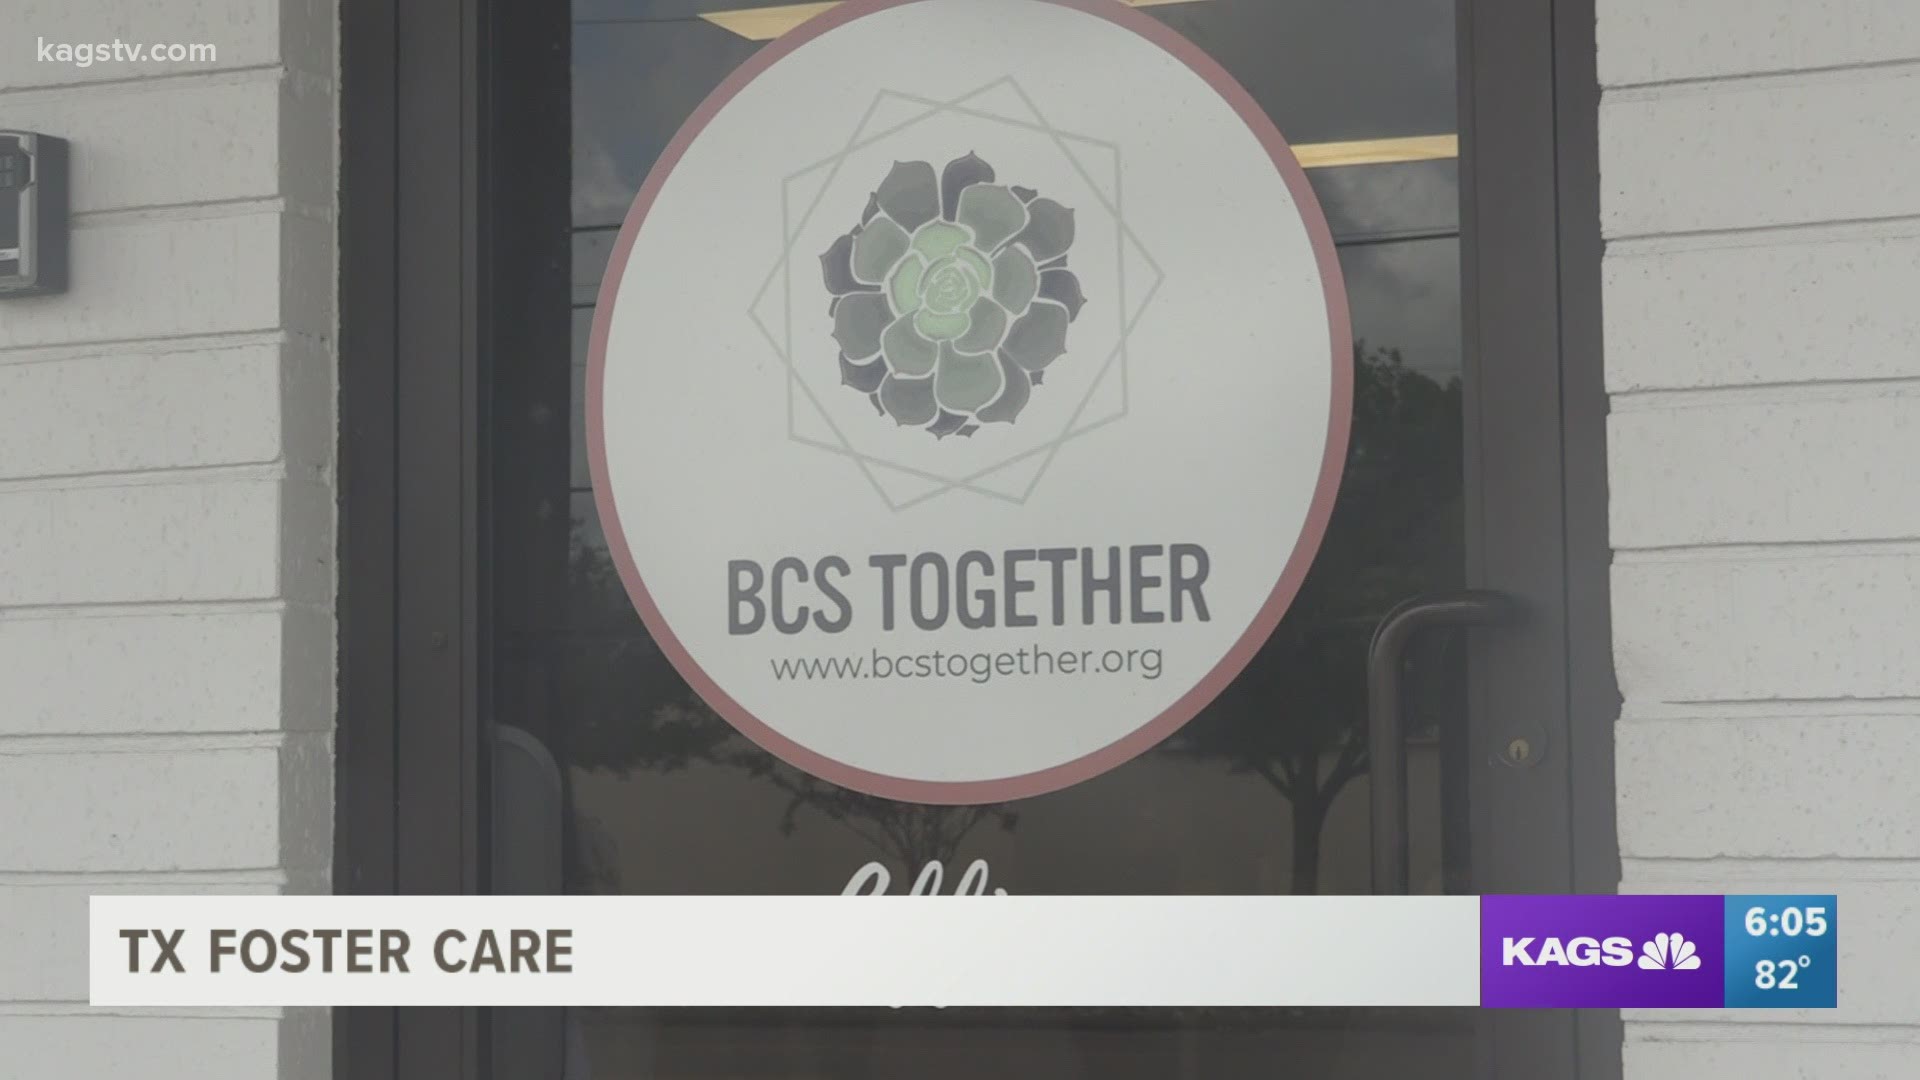 BCS Together in college station is a non-profit that works directly involving children in CPS care, foster kids, and kinship placement